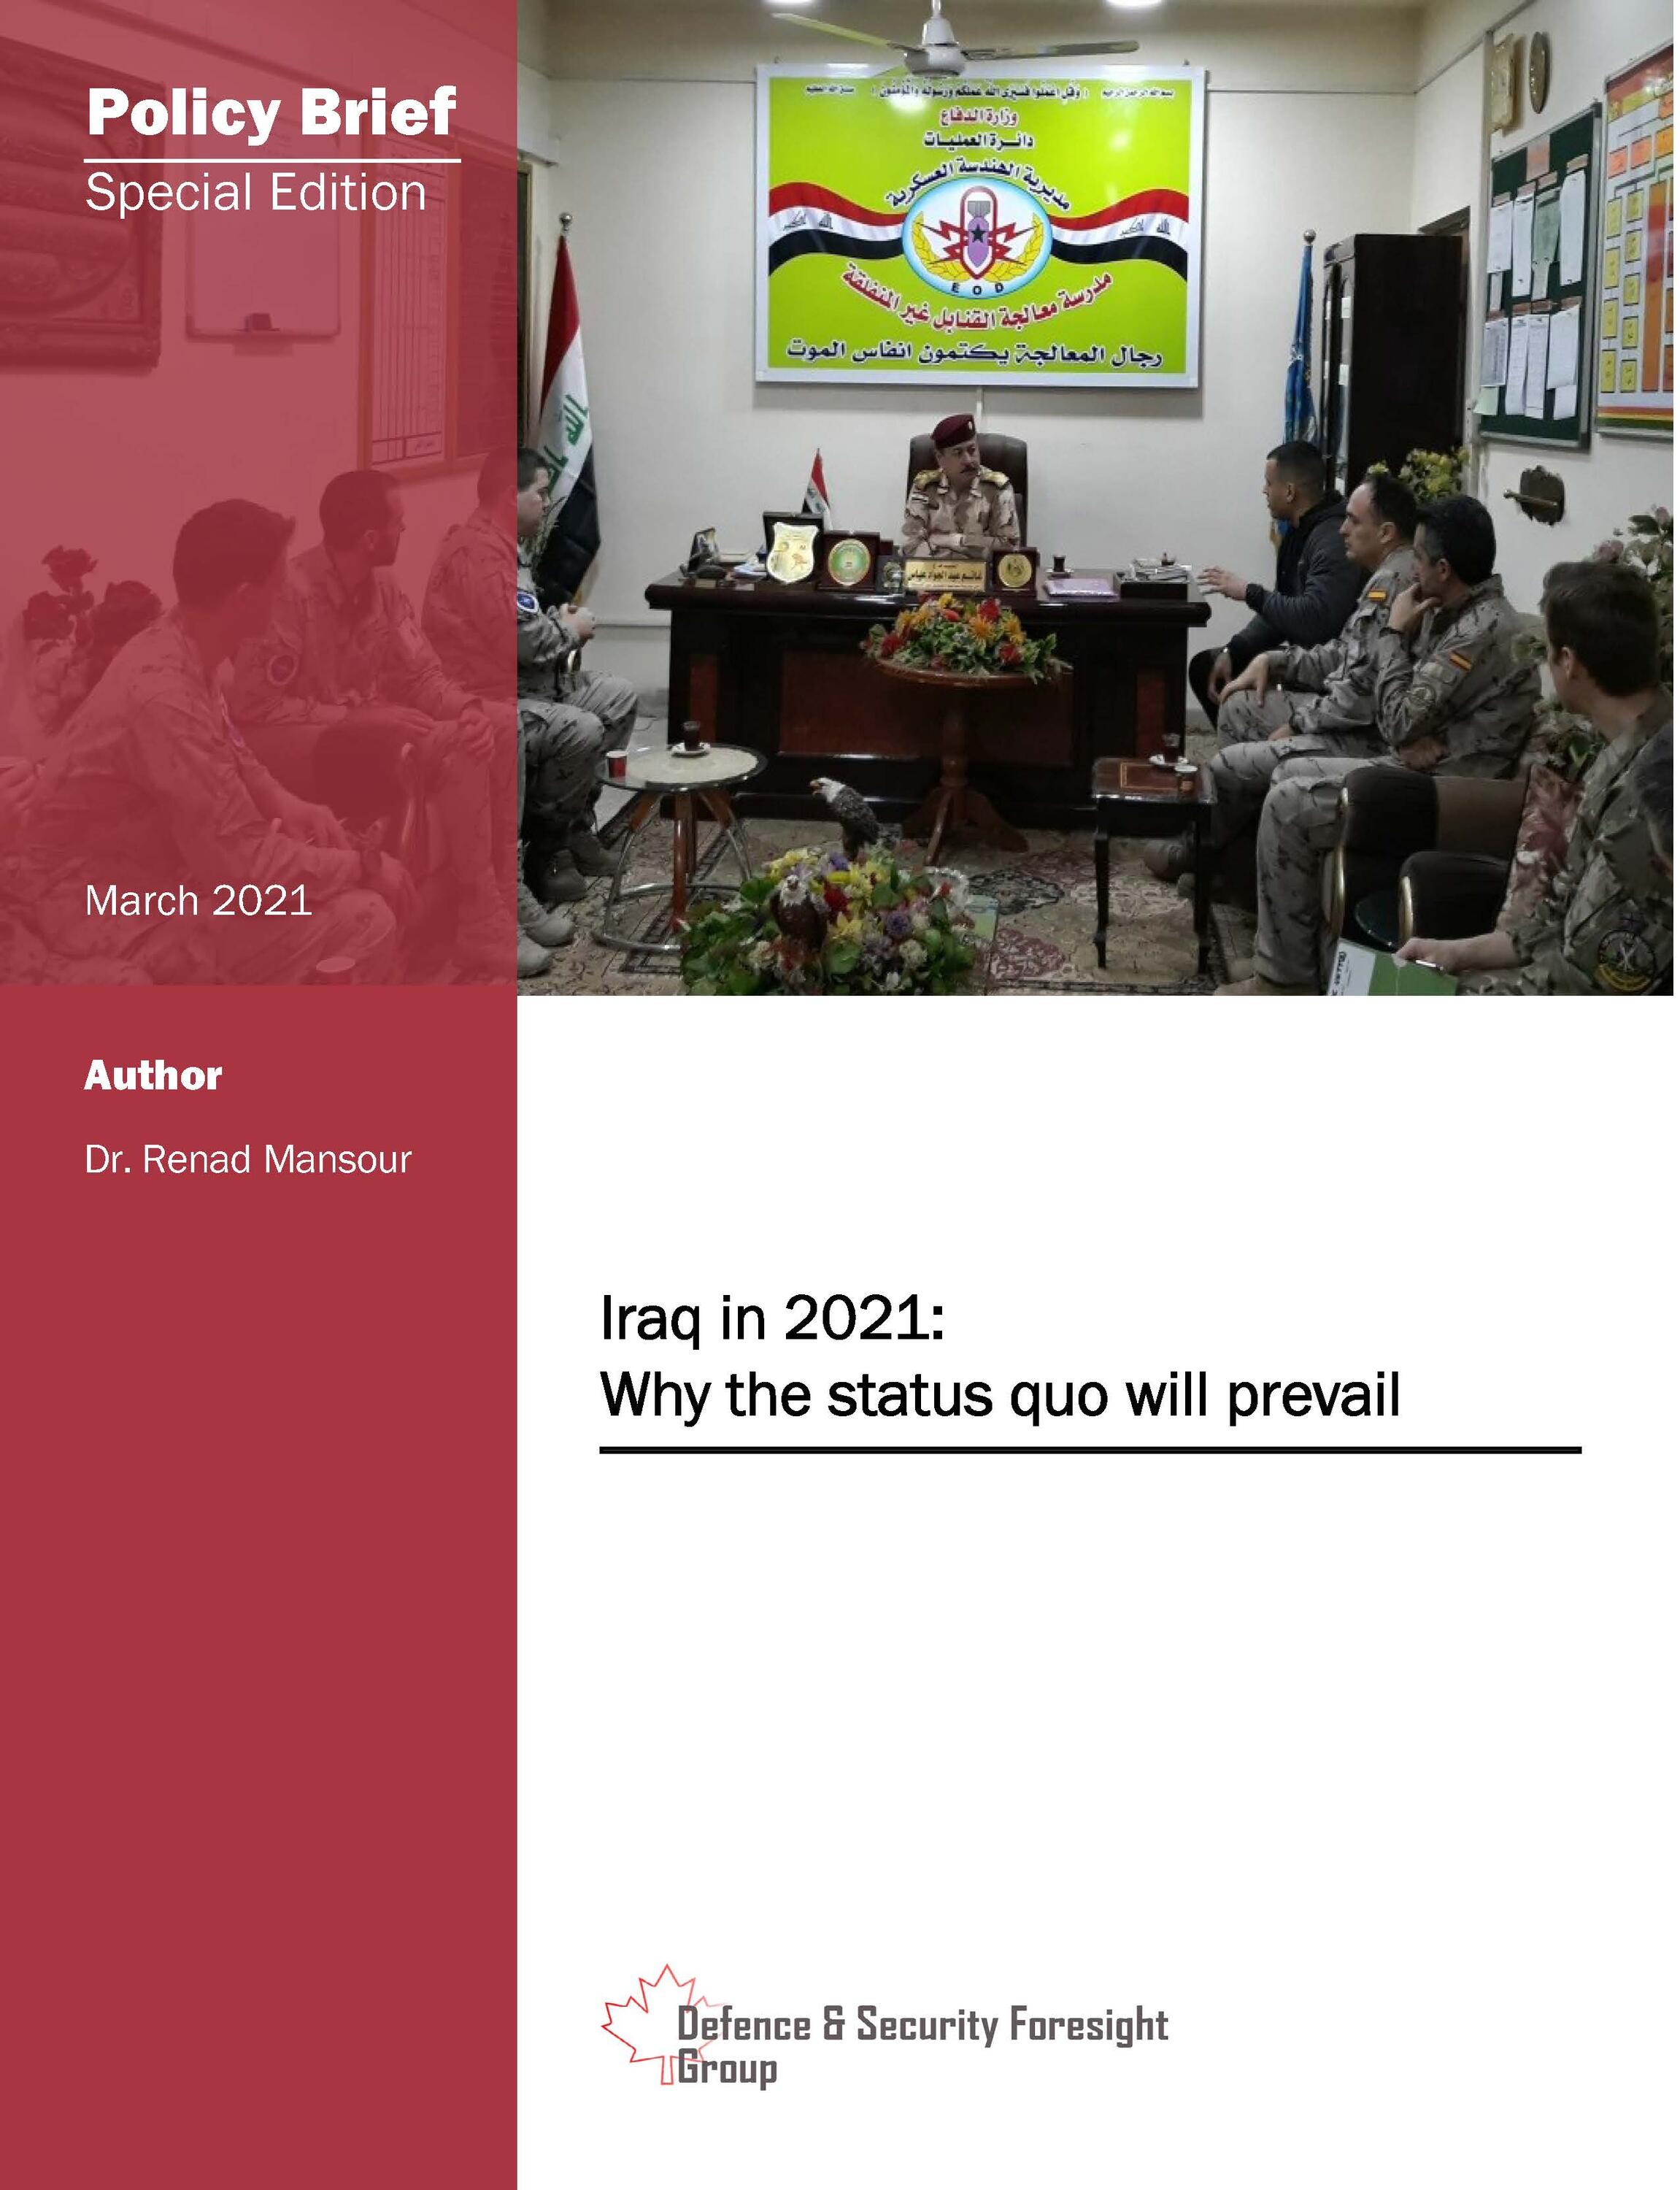 Mansour policy brief cover page